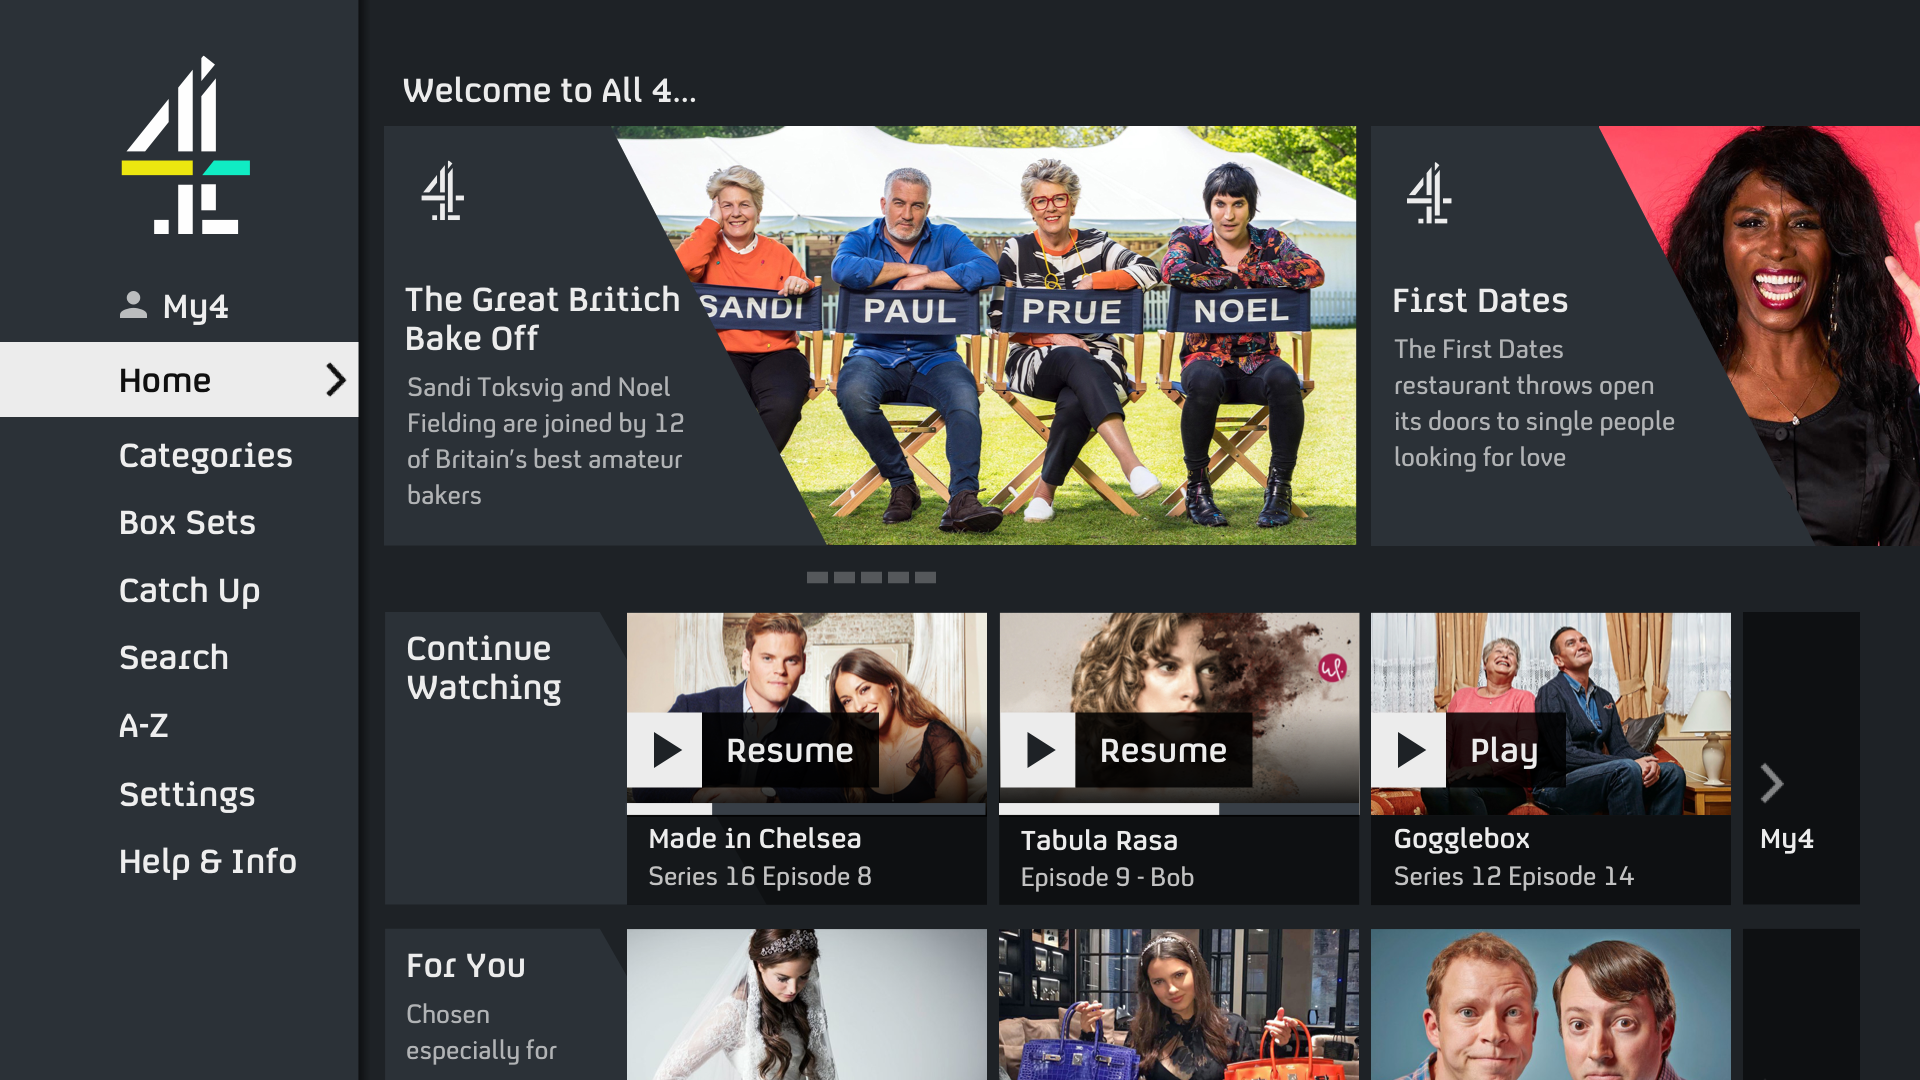 How to Watch TV Online in the UK Using Your Smartphone